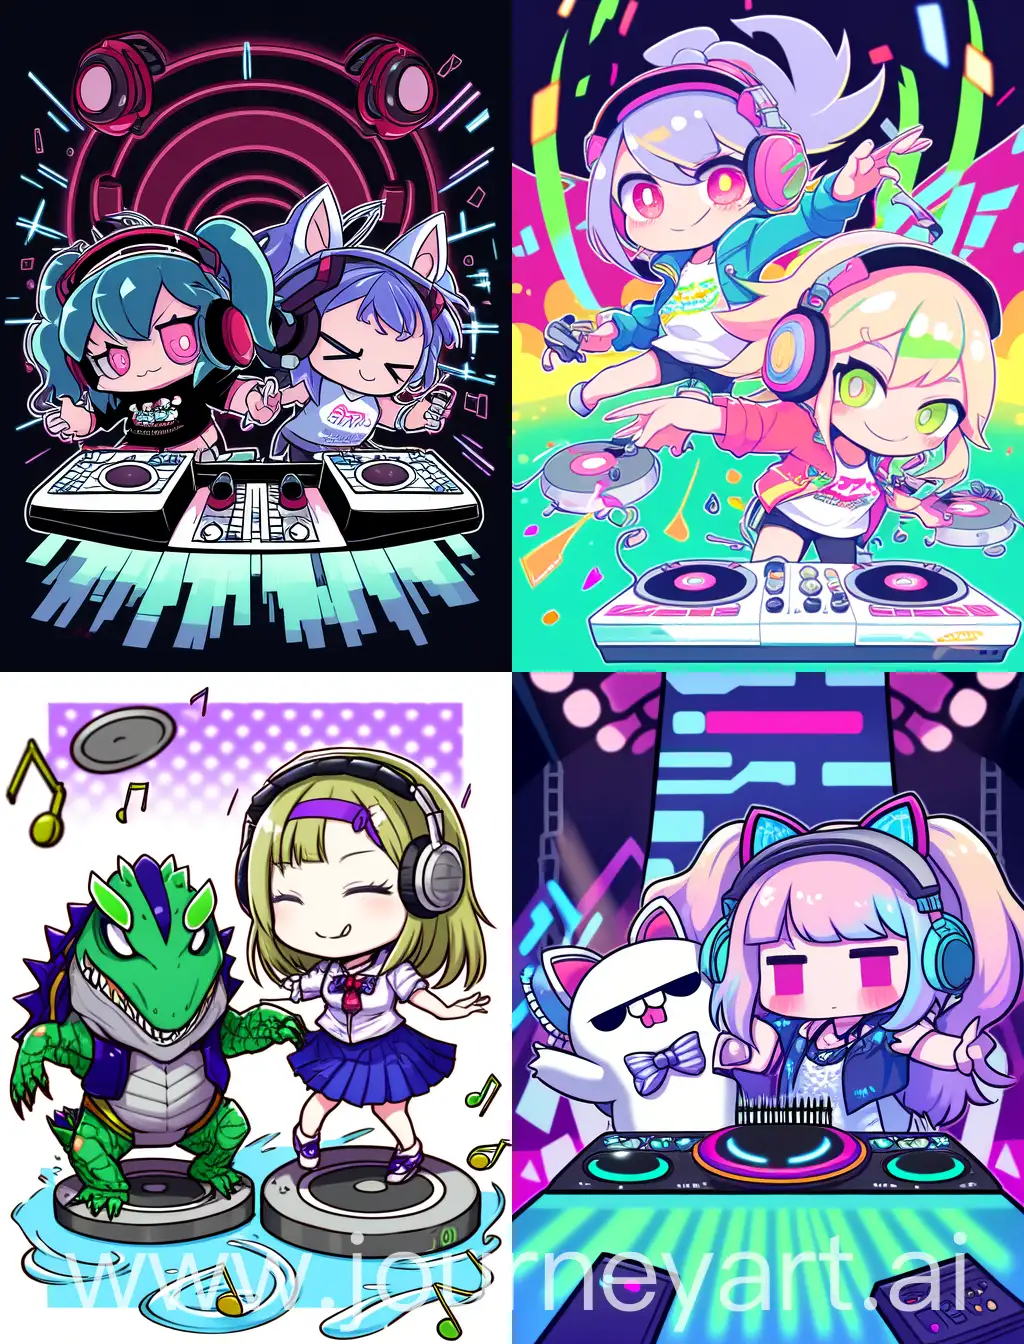 Chibi-Alligator-and-Anime-Girl-DJ-Party-on-Abstract-Background